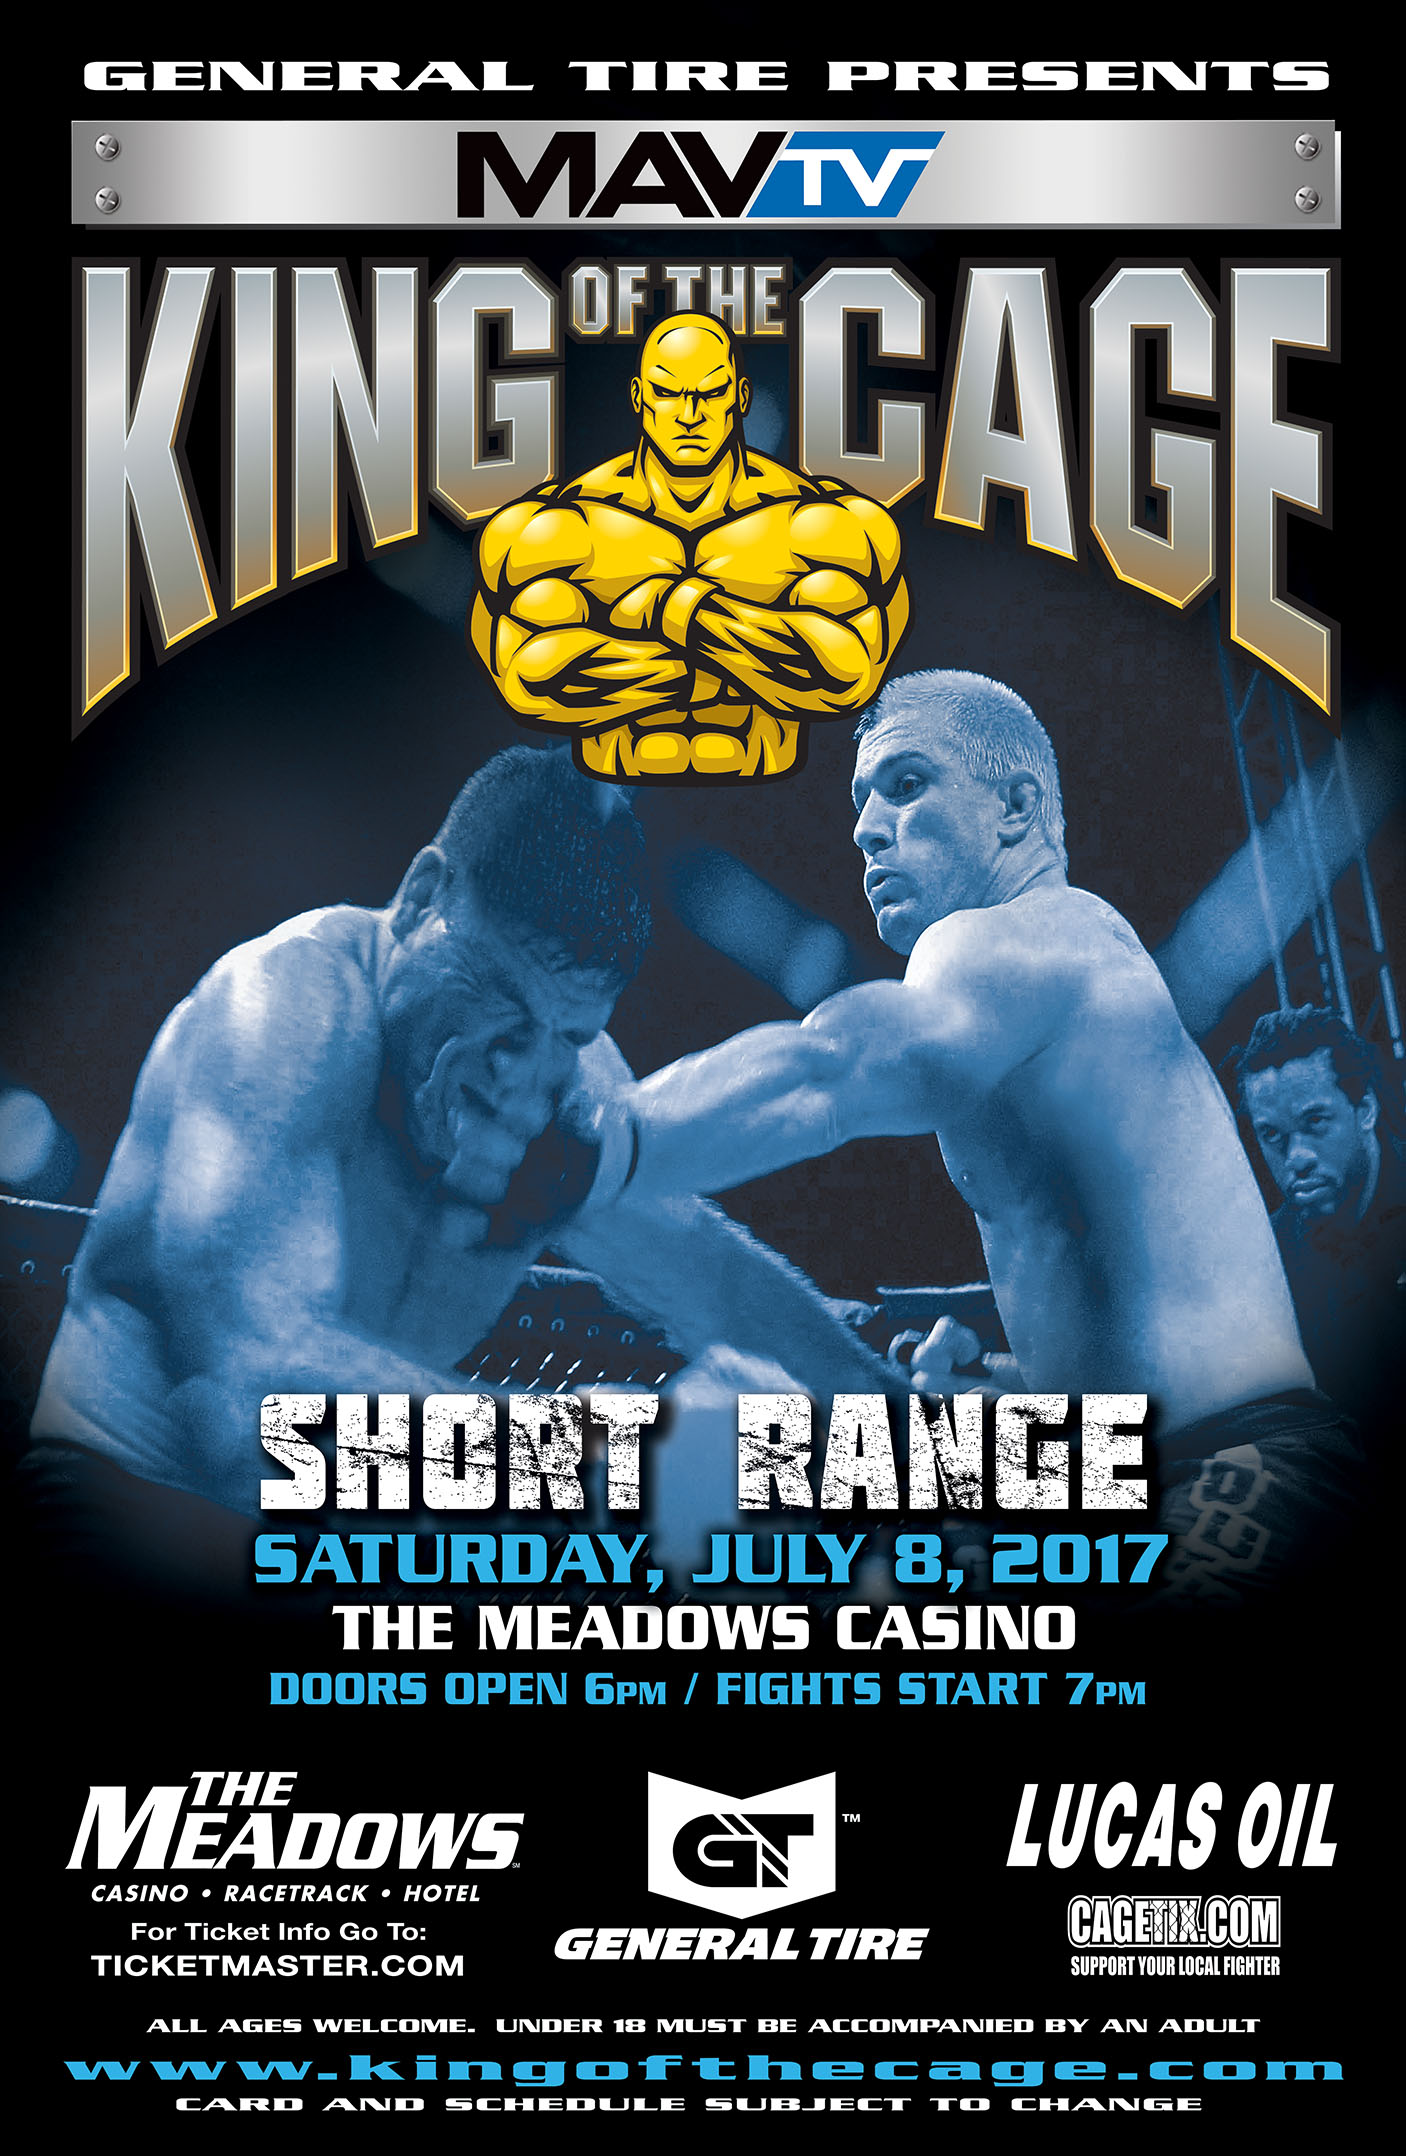 King of the Cage Returns to The Meadows Casino Racetrack Hotel on July 8 for “SHORT RANGE”